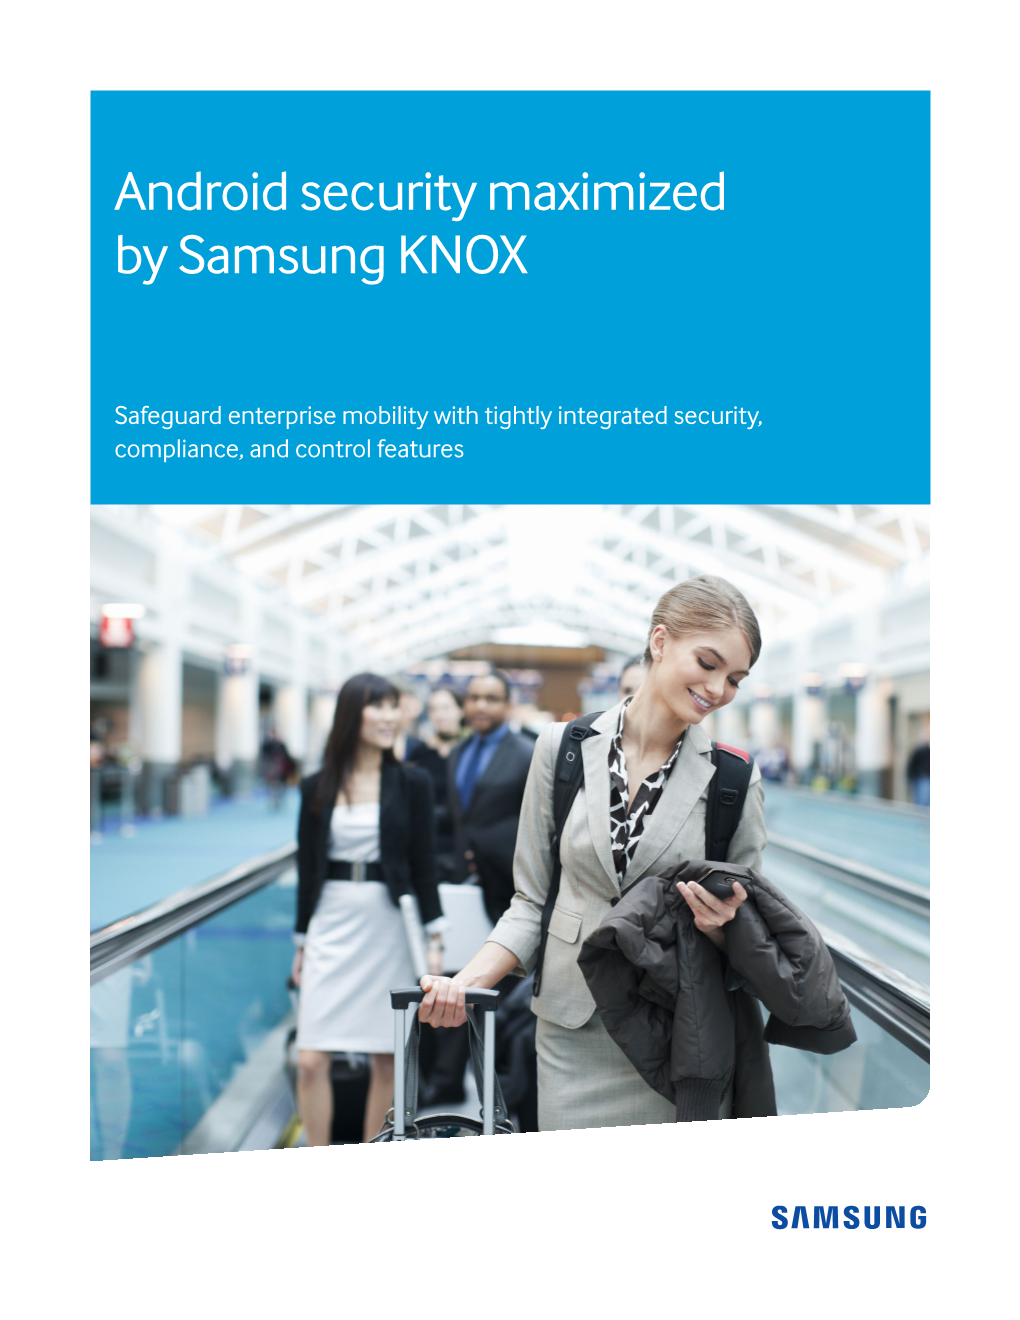 Android Security Maximized by Samsung KNOX